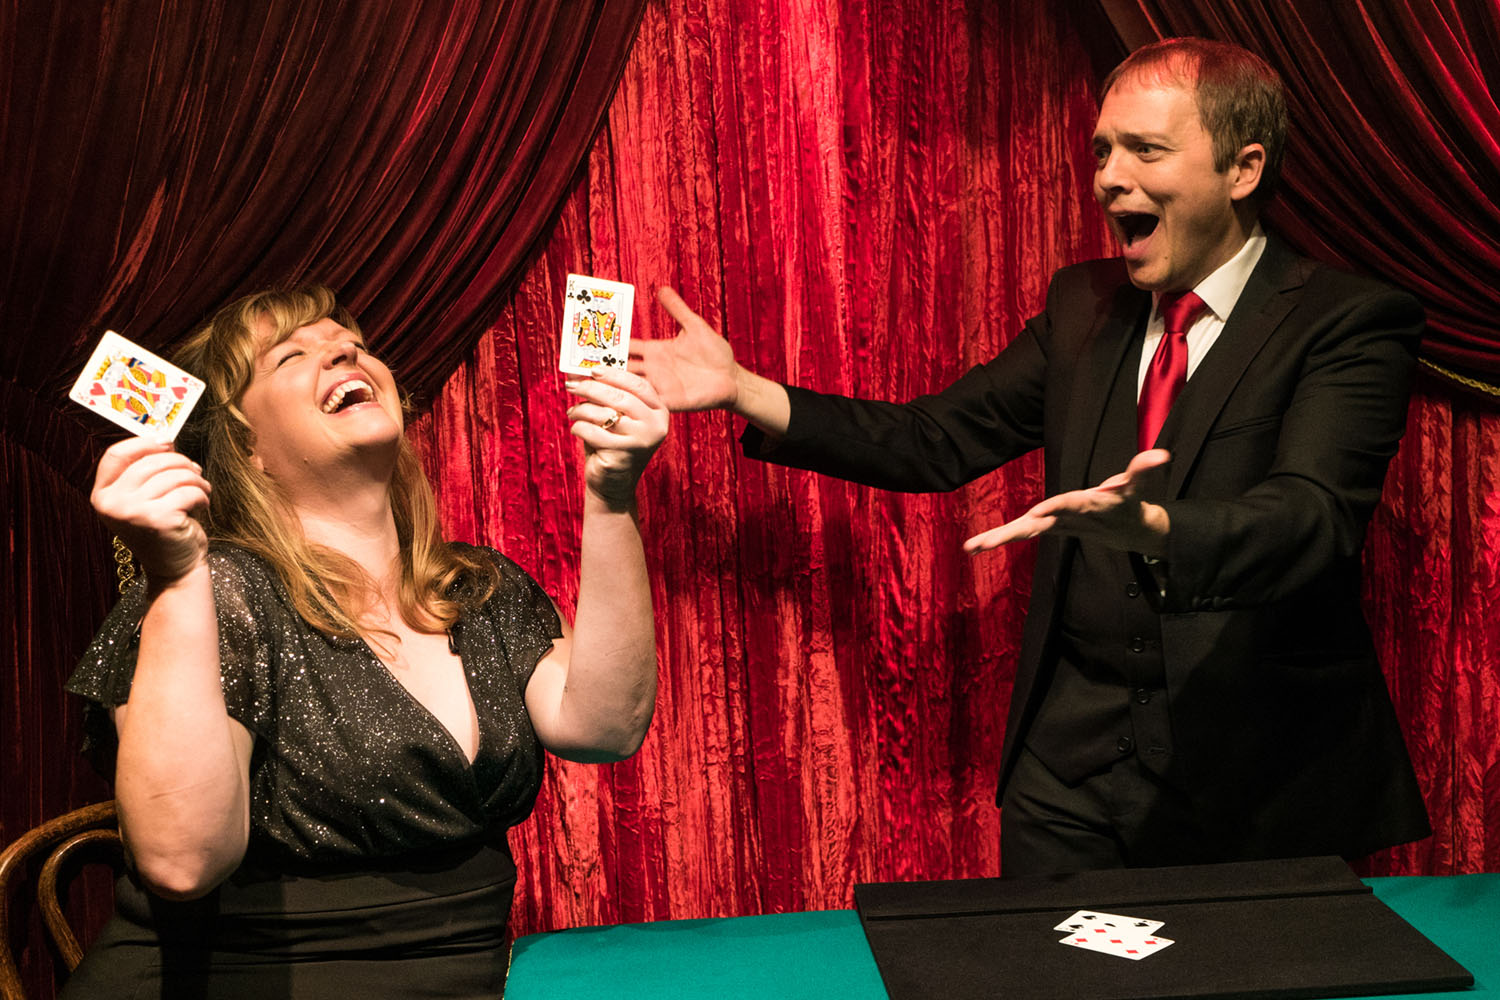 The French magician Boris Wild performing his close-up show at The Magic Castle in Hollywood